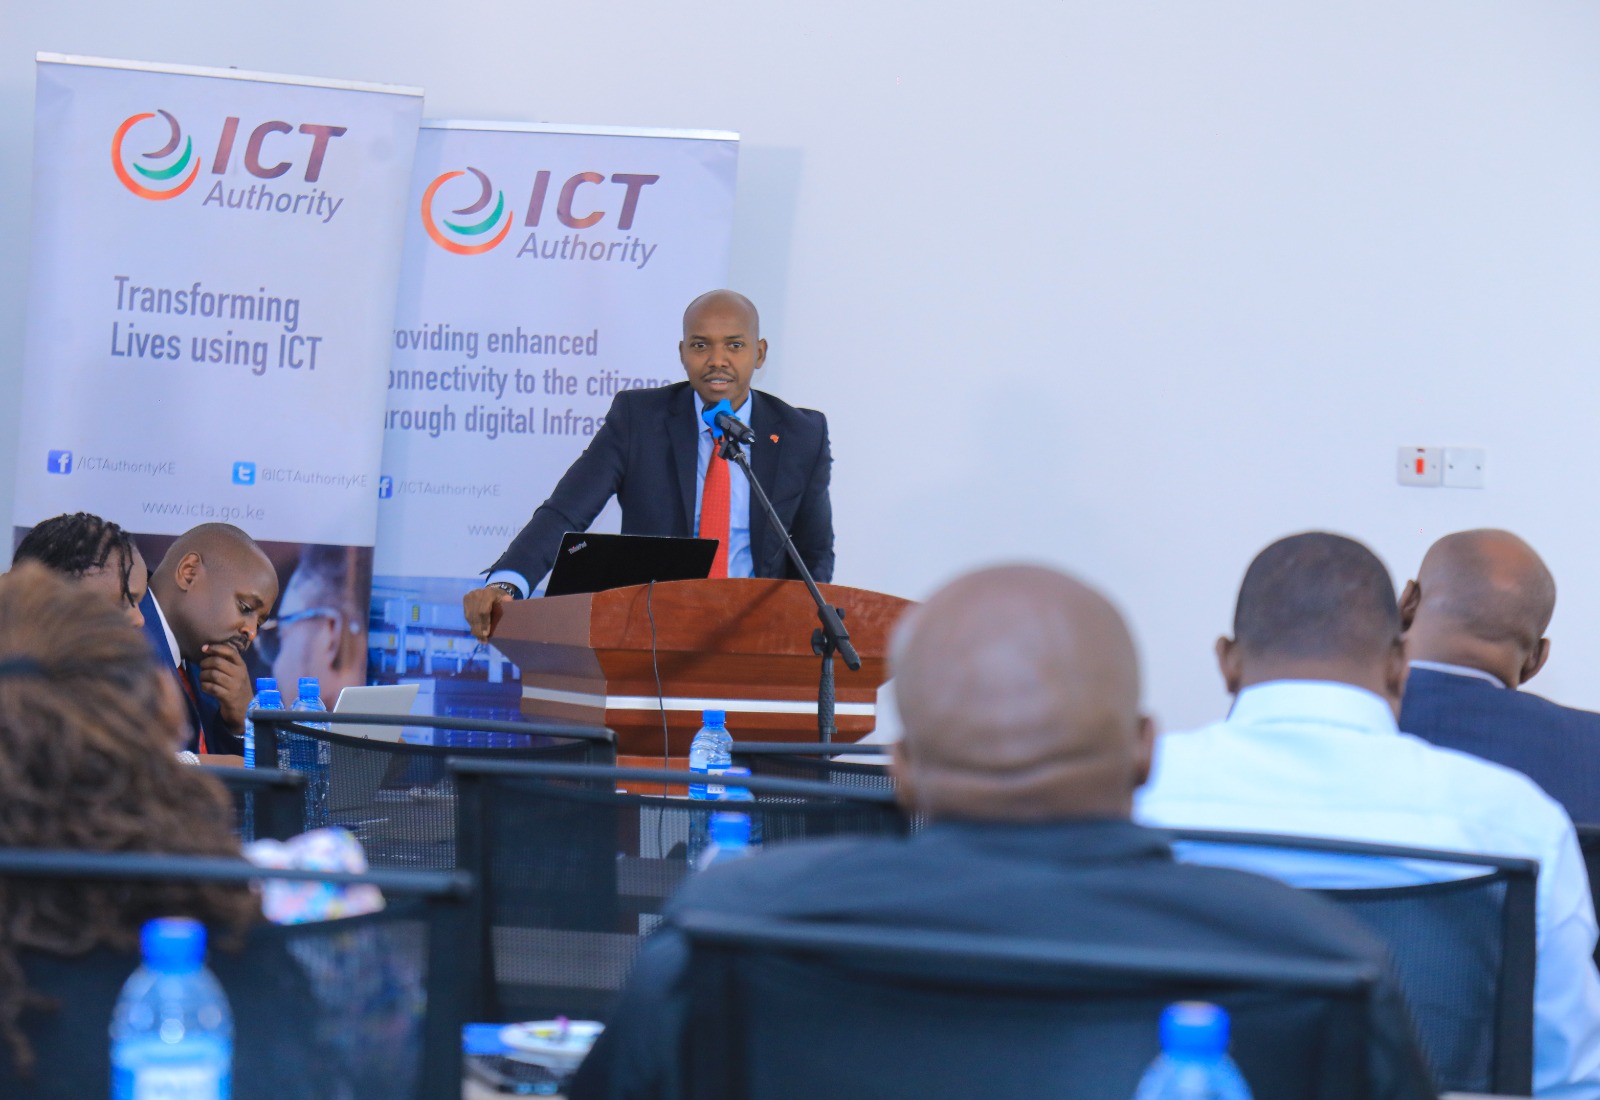 Kenya reintroduces controversial ICT Authority Bill, sparking industry concern